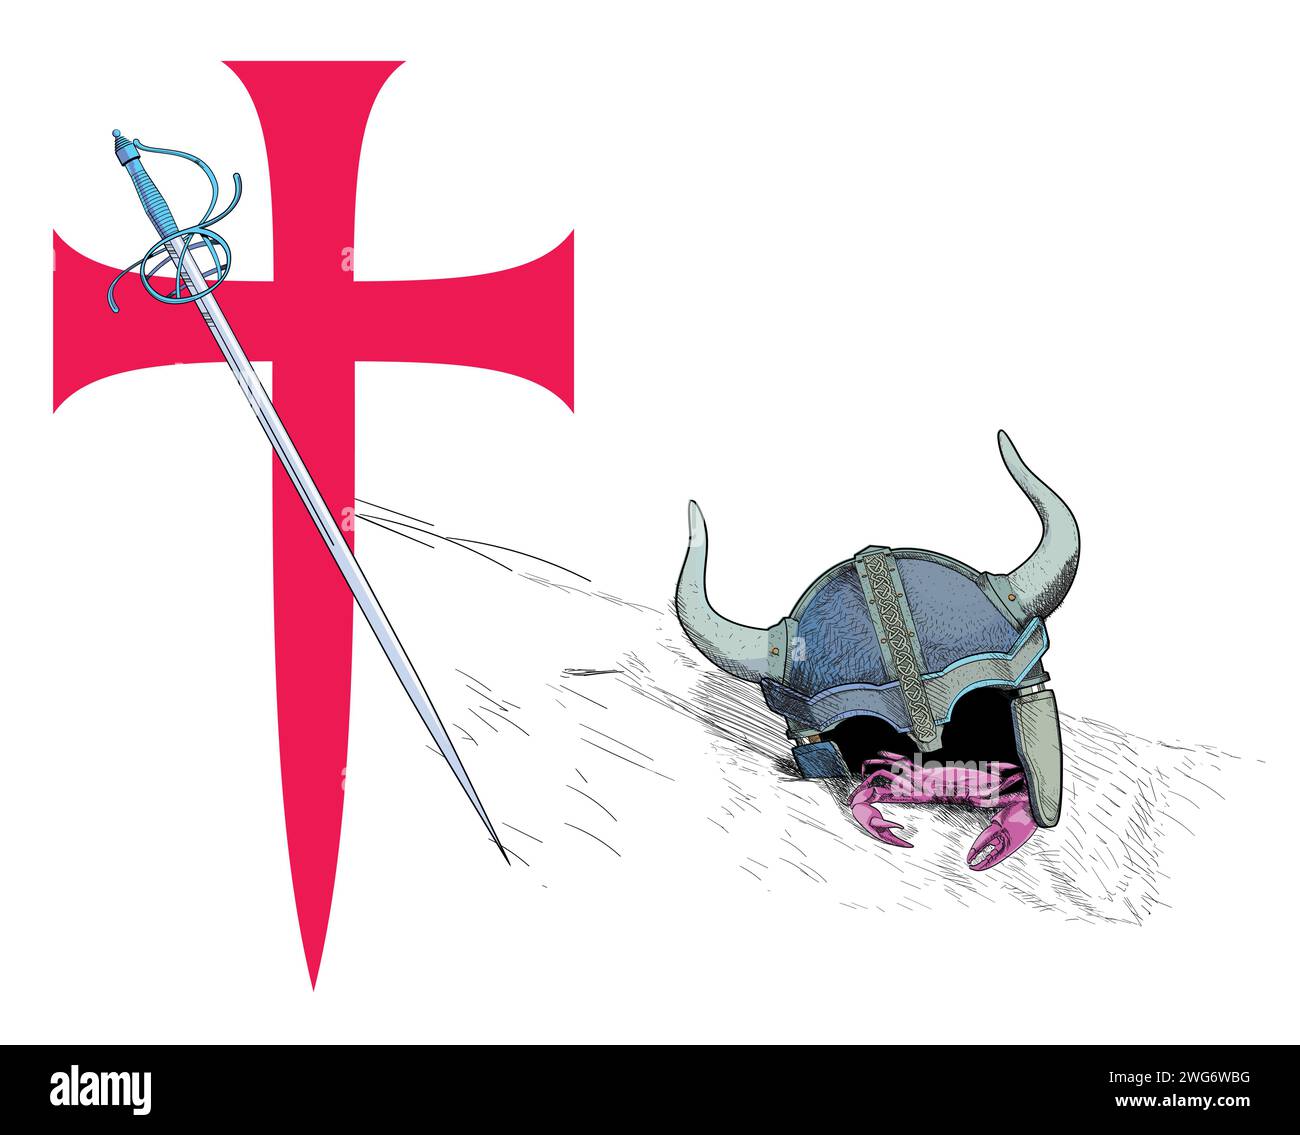 T-shirt design of a large medieval cross next to a sword and a fallen horned helmet. Illustration on themes of knights errant. Stock Vector